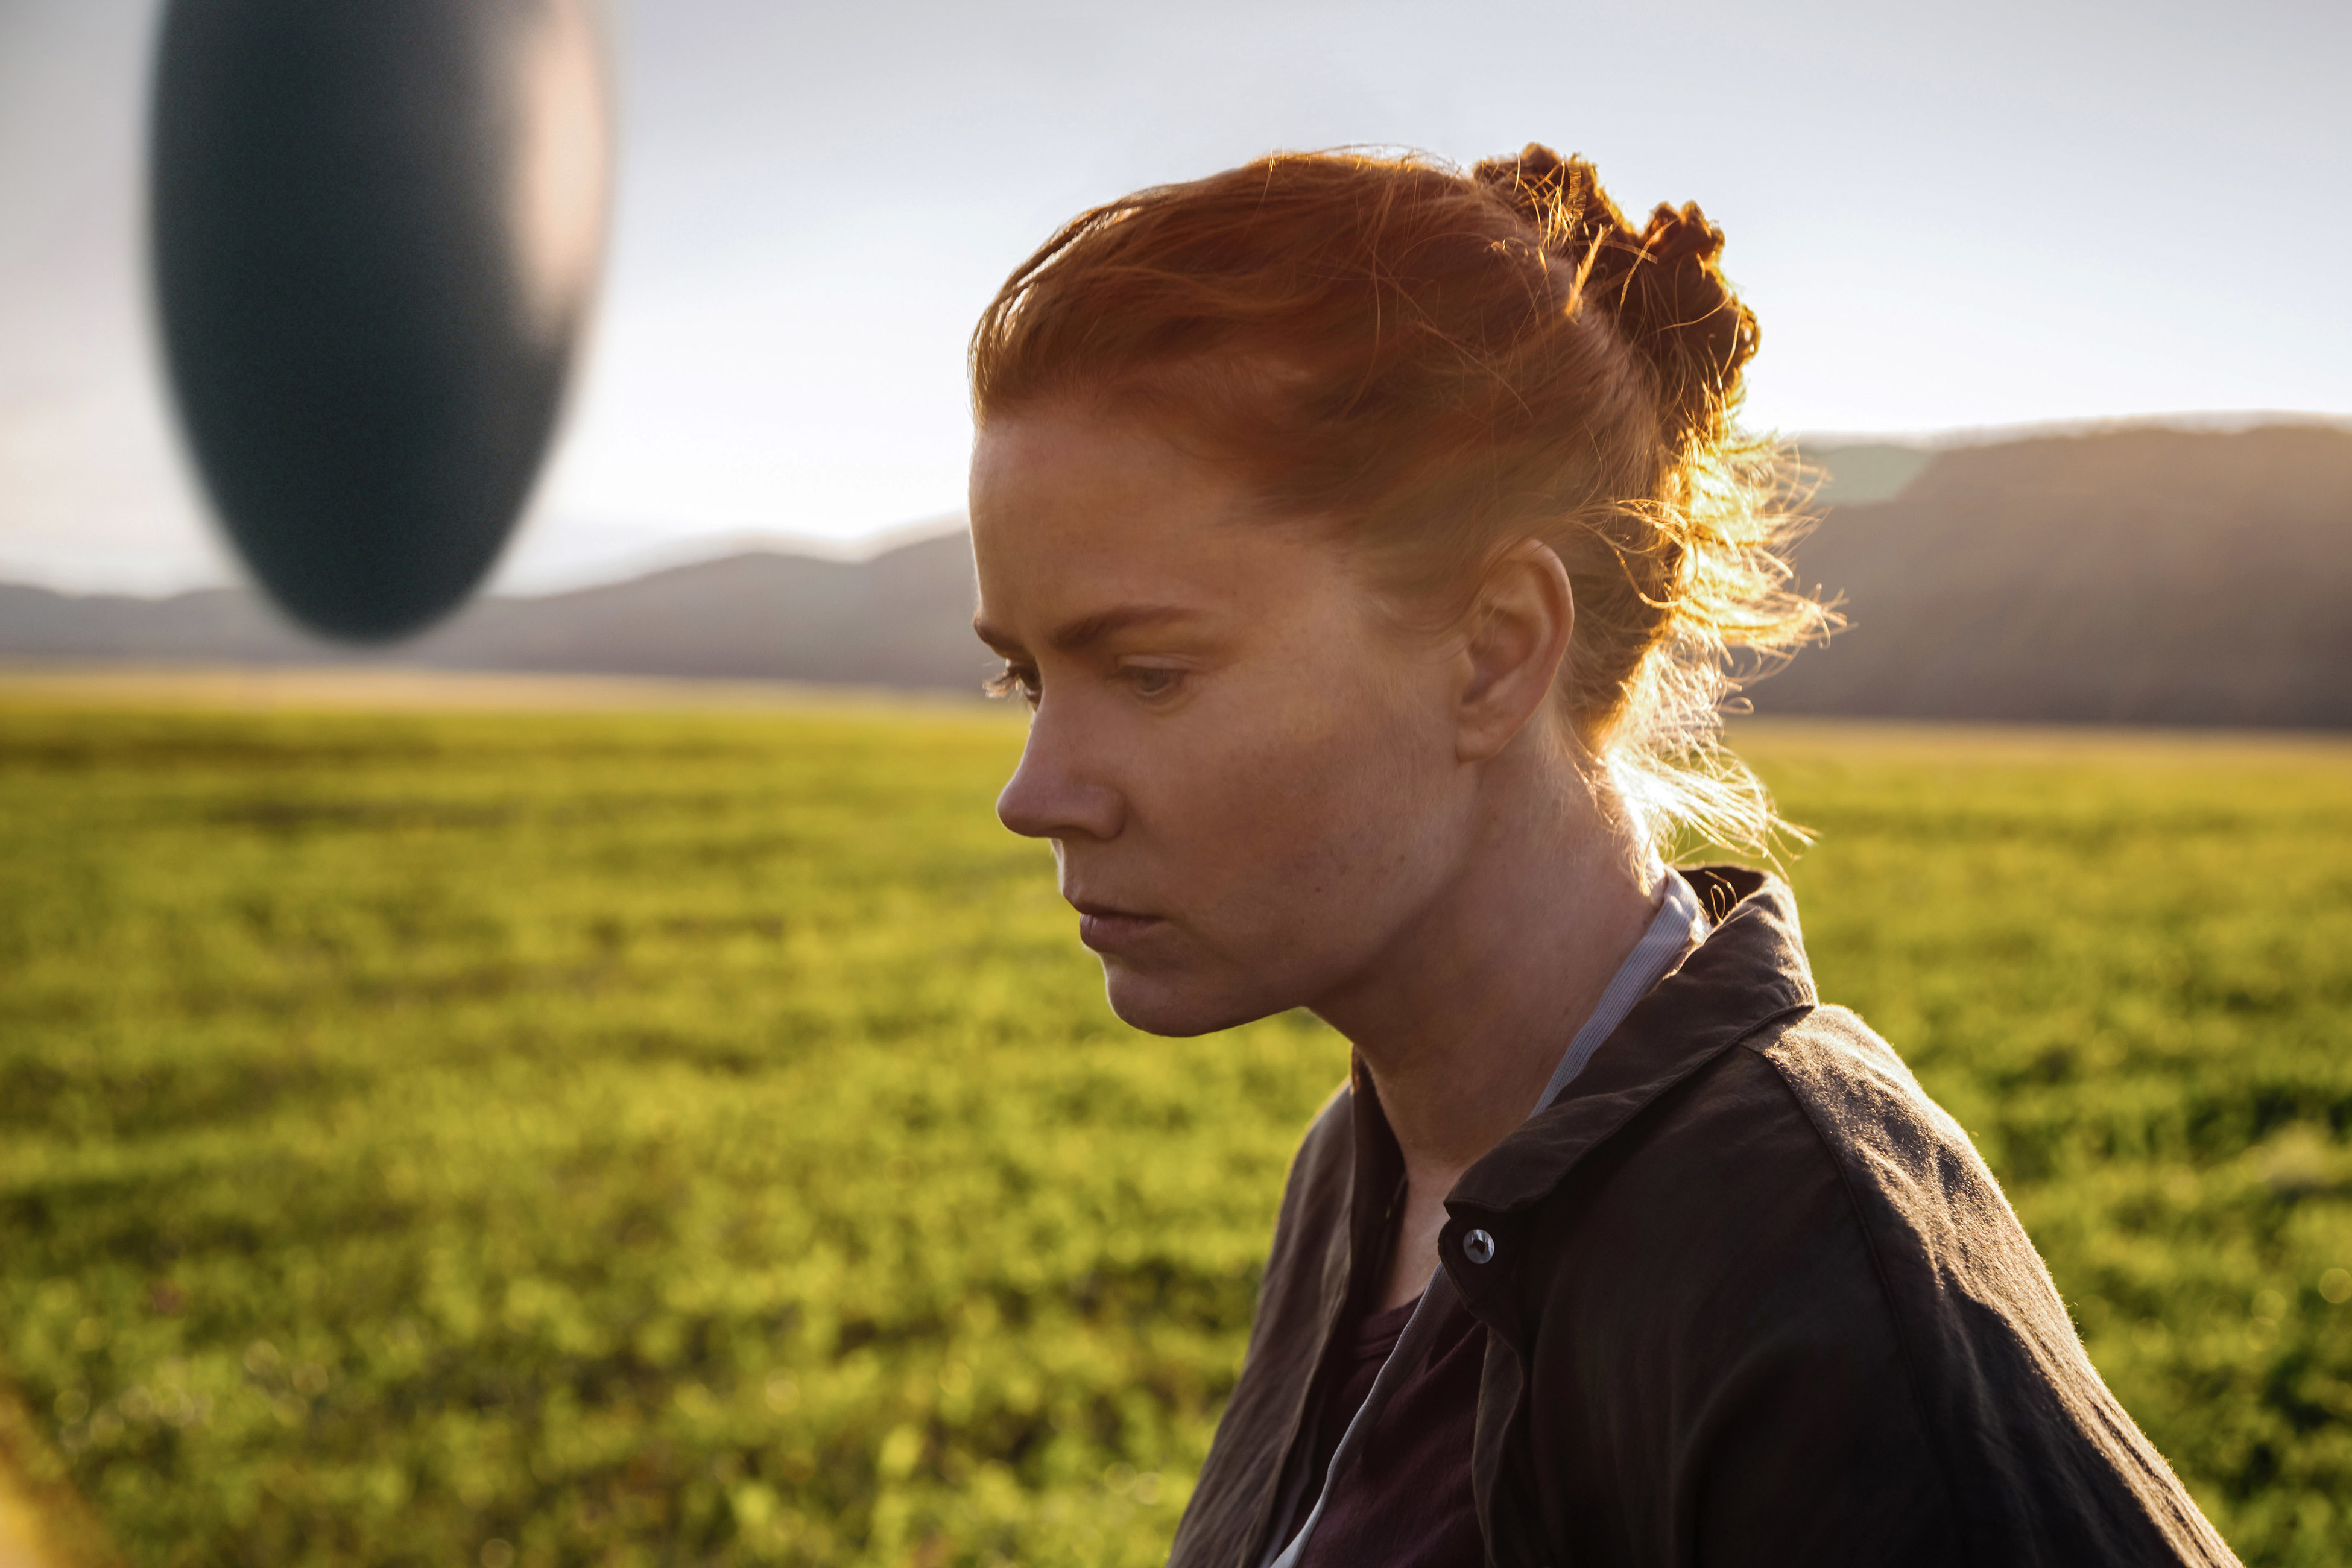 Amy Adams gazes thoughtfully in a scene from &quot;Arrival,&quot; with an alien spacecraft hovering in the distance over a field